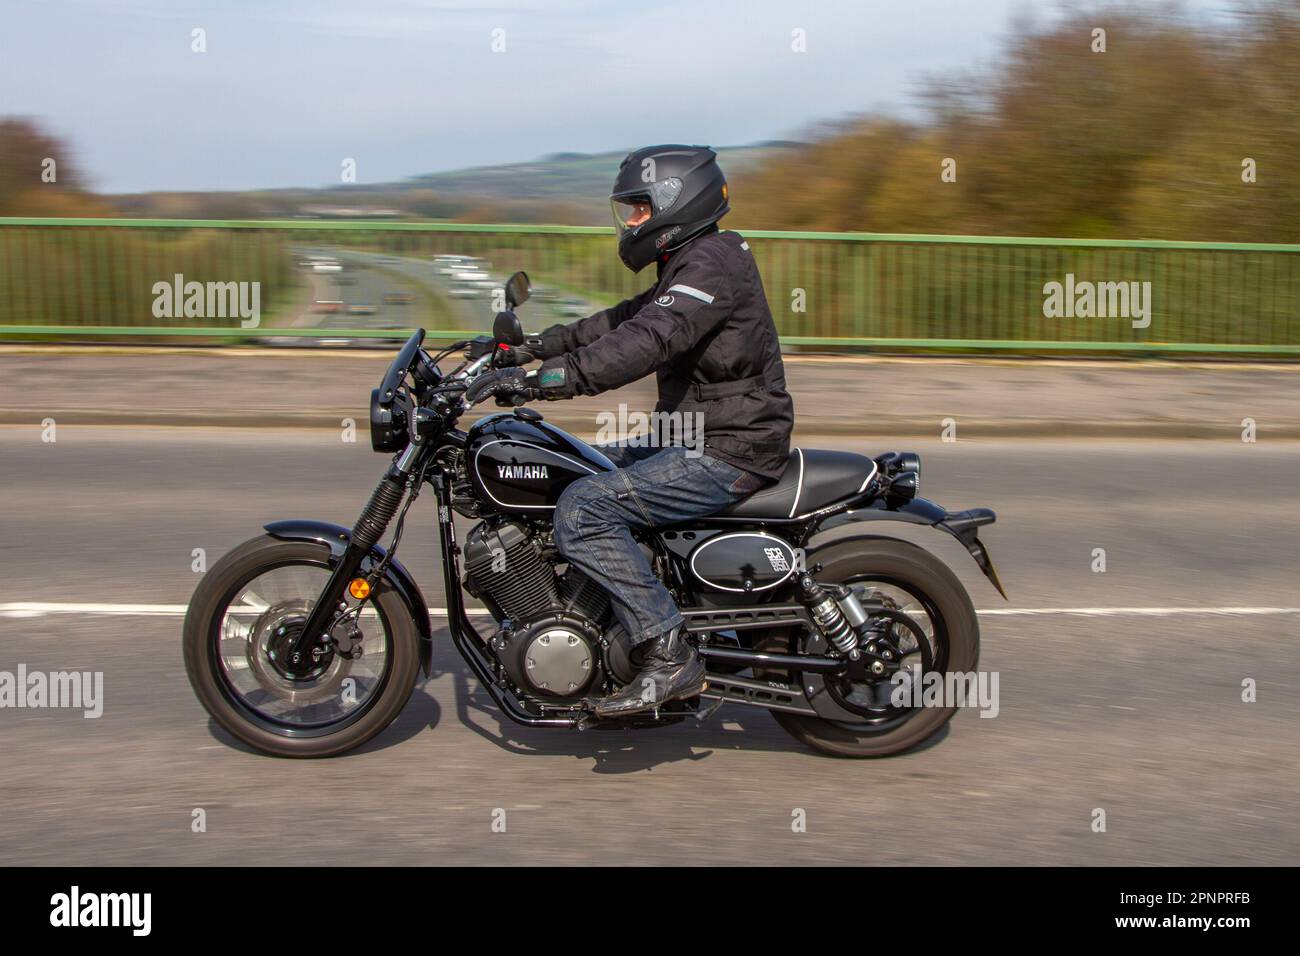 2017 Yamaha XVS 950 xr-A - SCR 950 V Twin EU4 Black Motorcycle Cruiser benzina 950 cc; ponte autostradale in Greater Manchester, Regno Unito Foto Stock